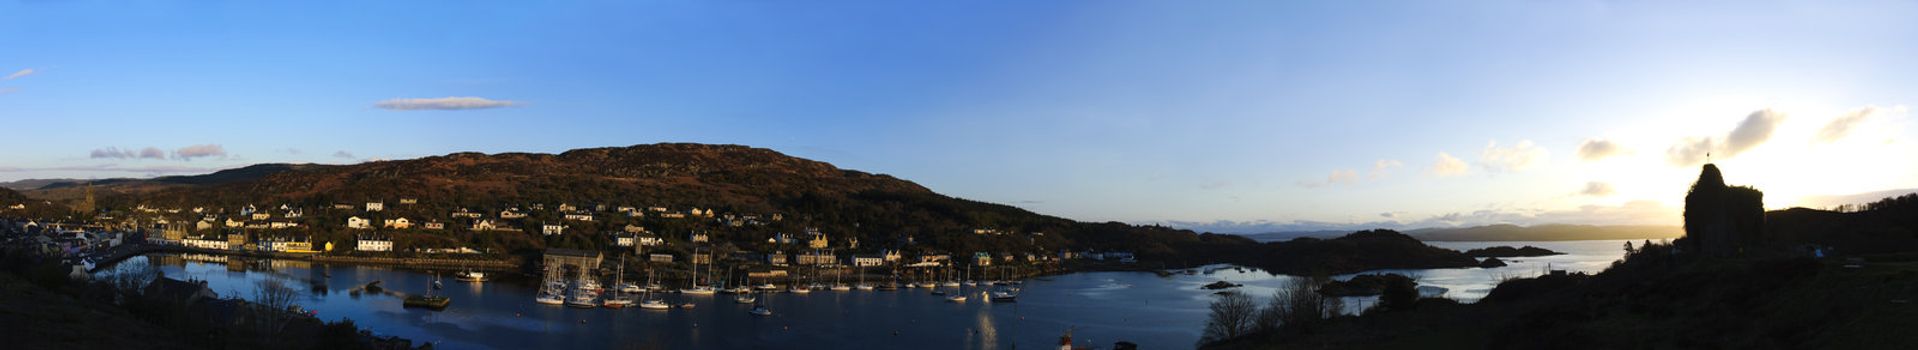 Panorama of Loch Fyne, Bruce's castle and Tarbert Harbor in Scotland at sunrise